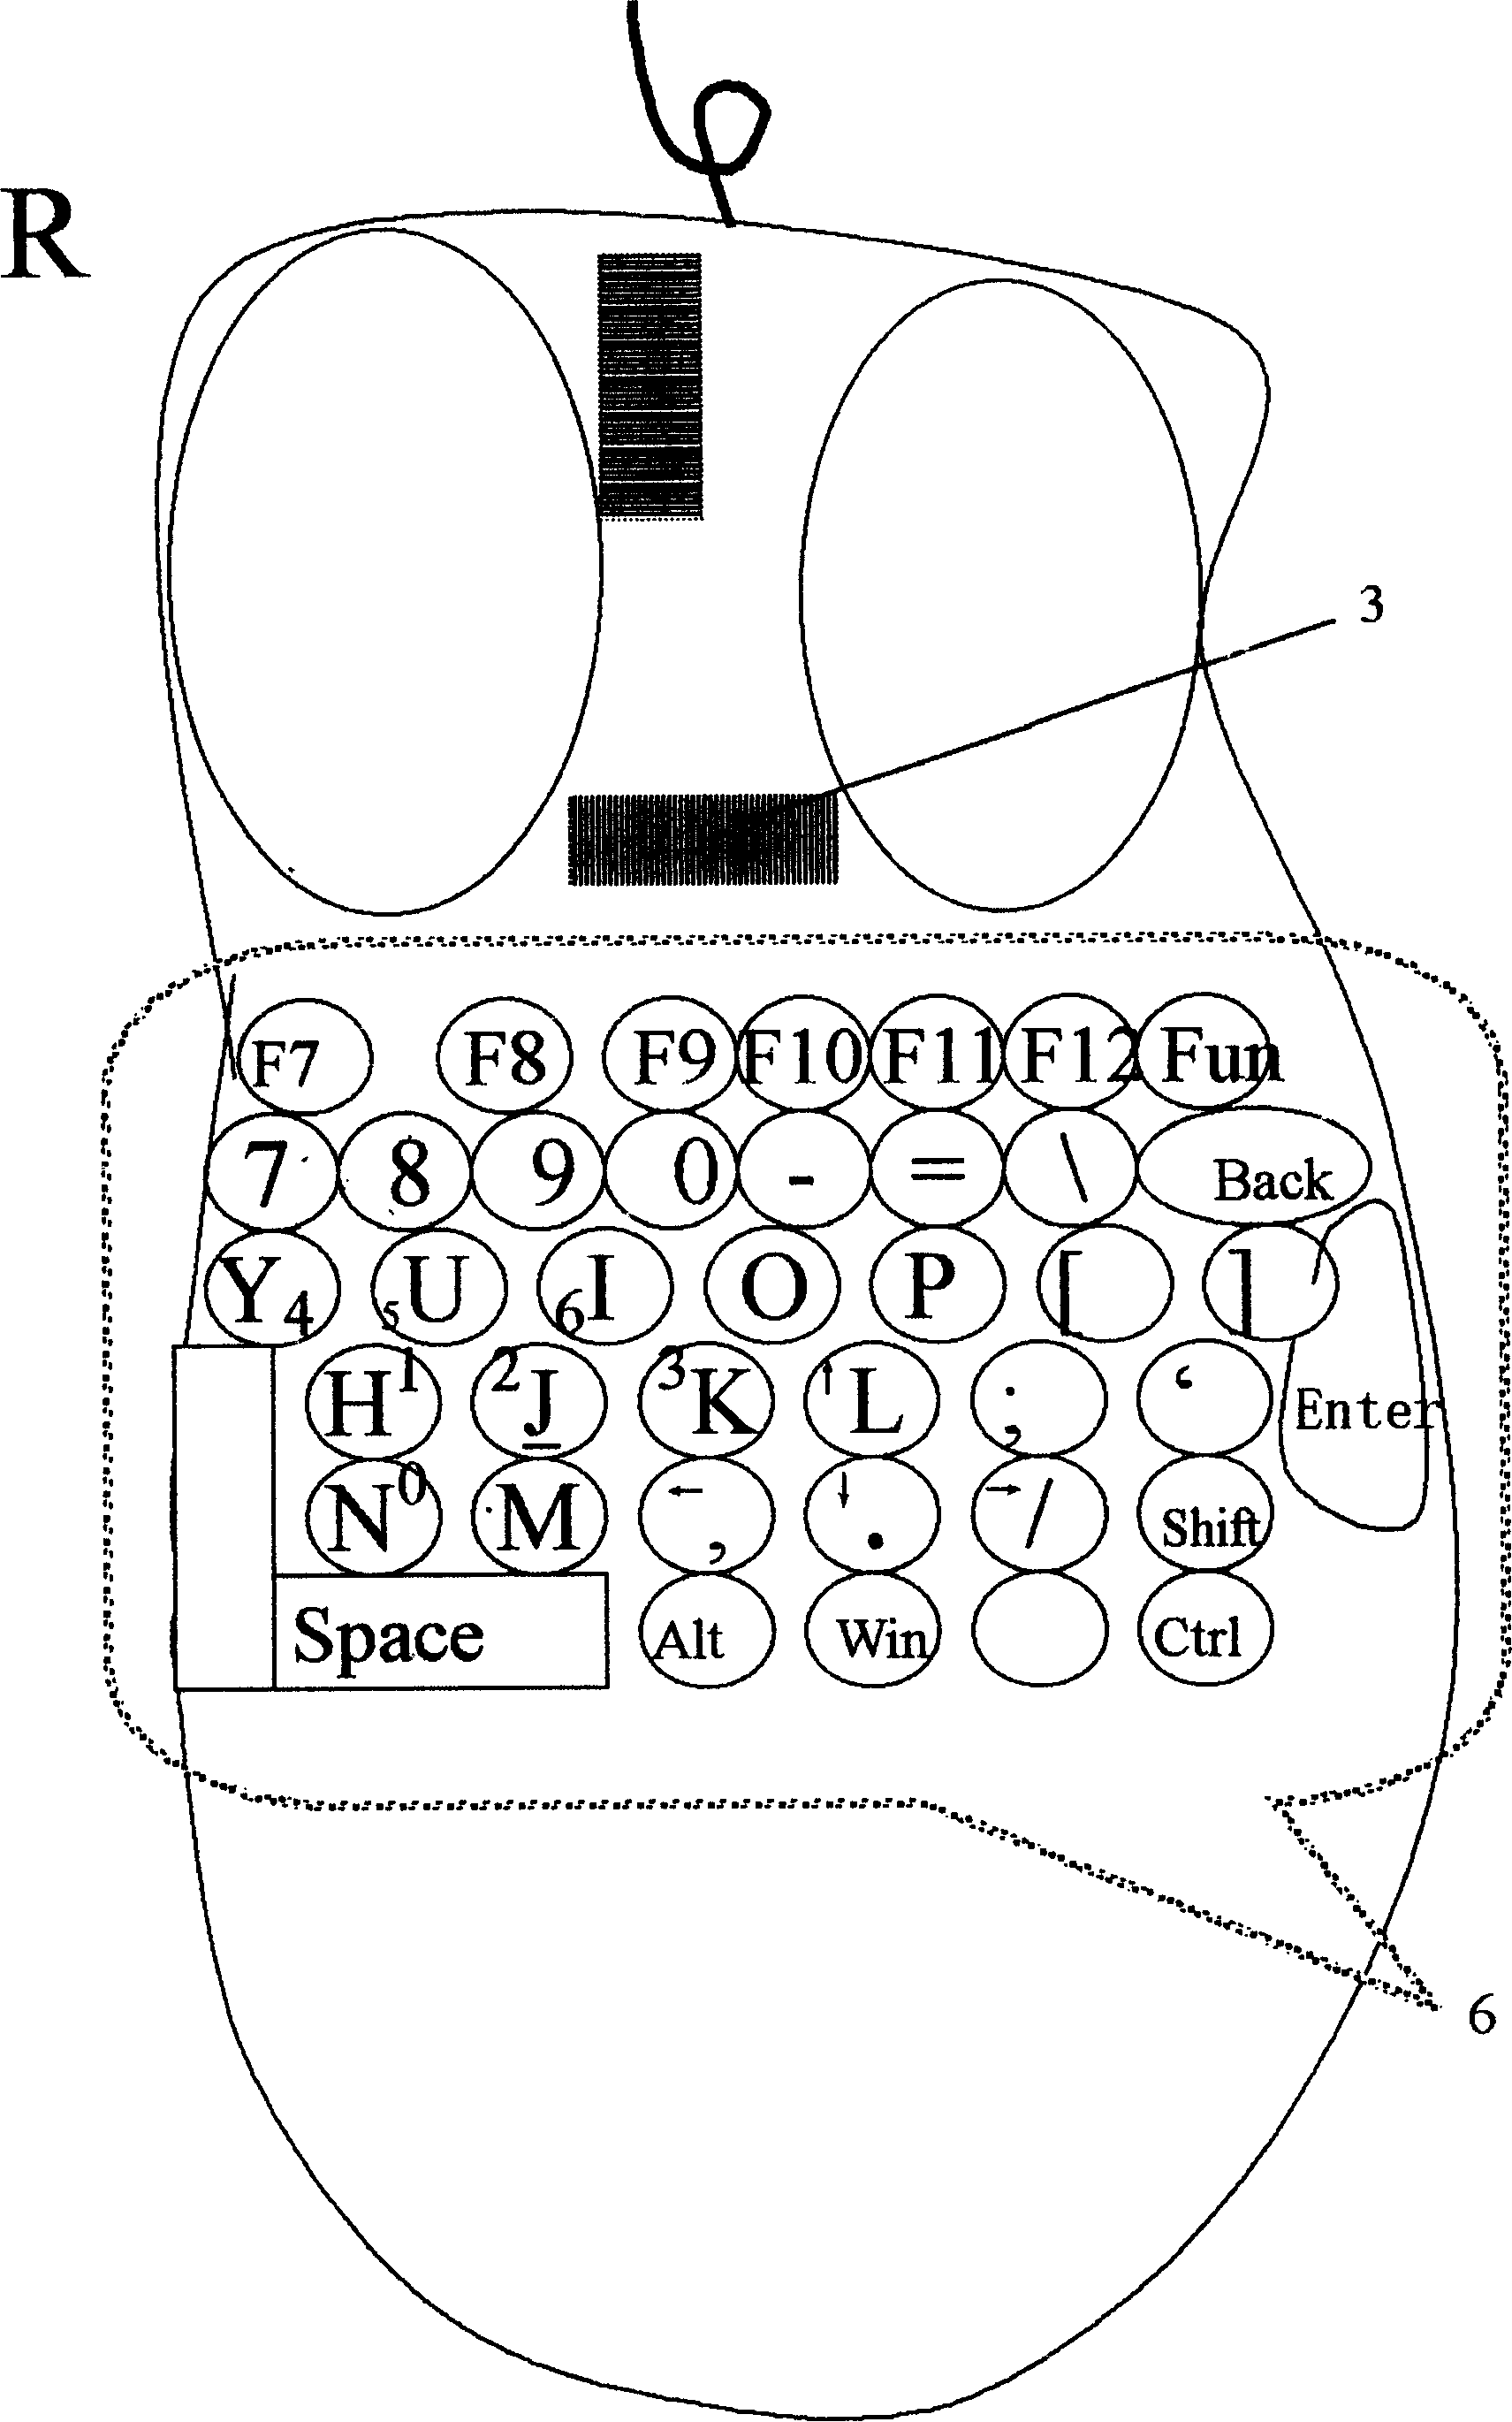 Mouse keyboard